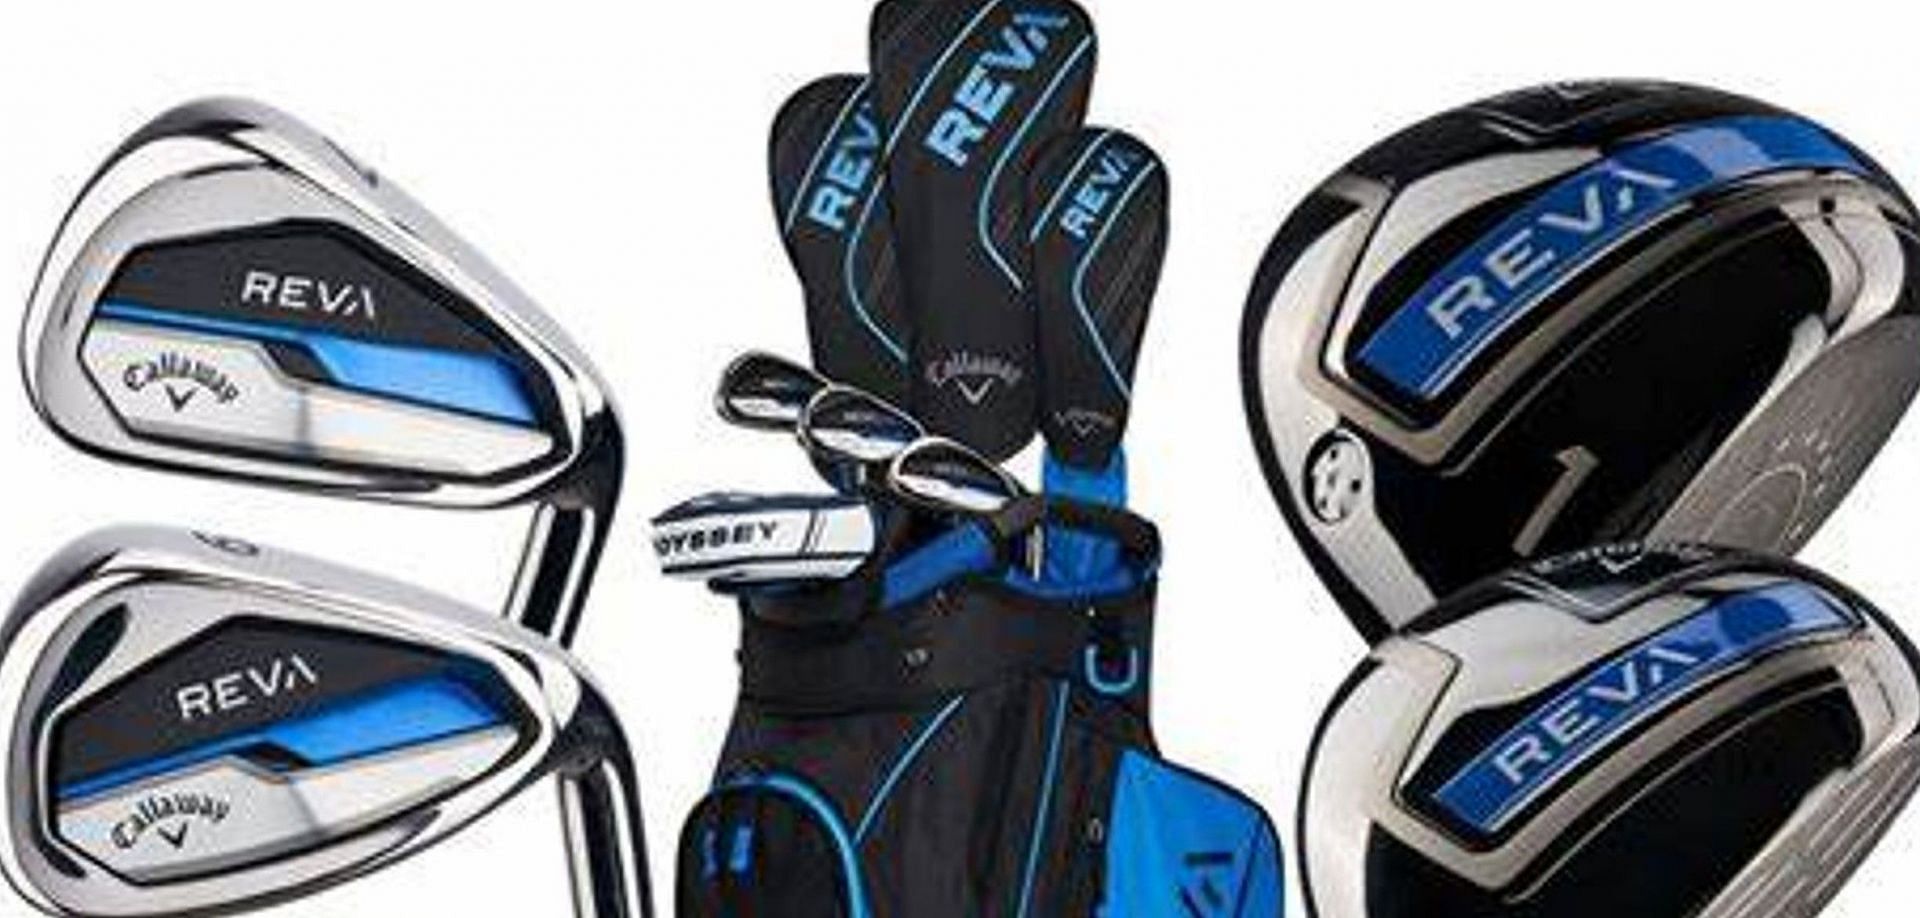 The 5 best golf club sets for beginners - Golf Care Blog